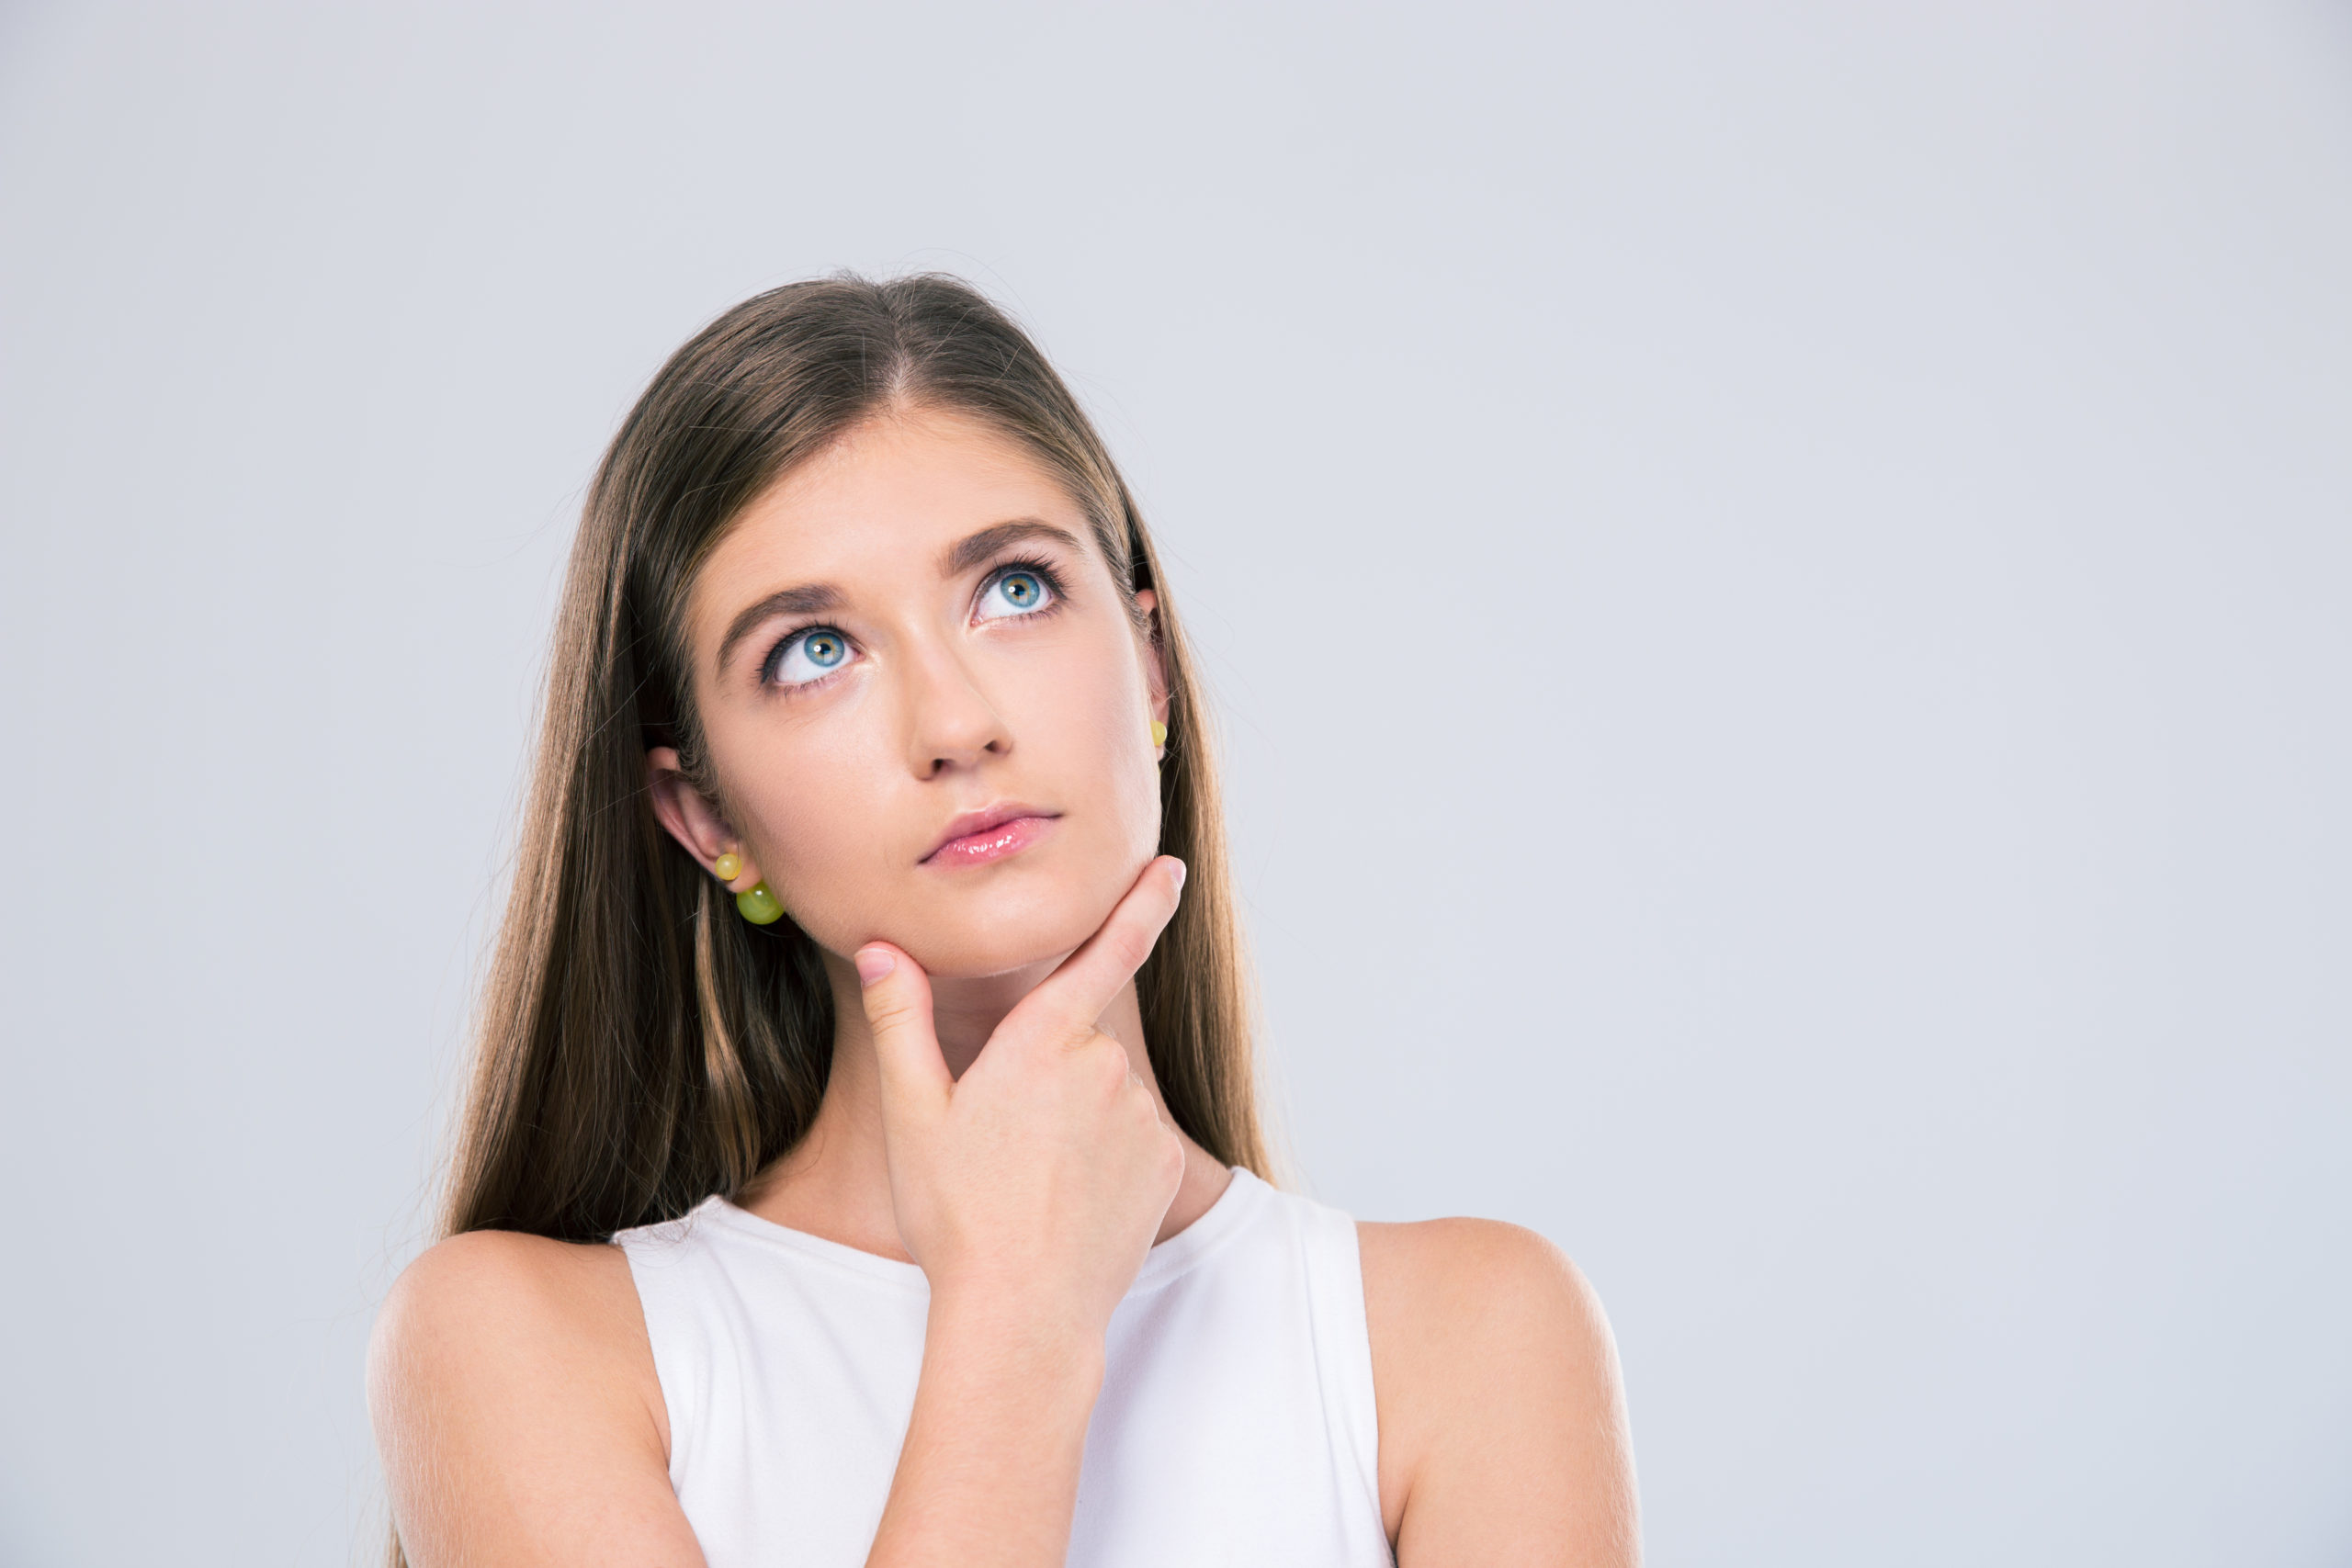 Portrait of a pensive female teenager looking up isolated on a white background